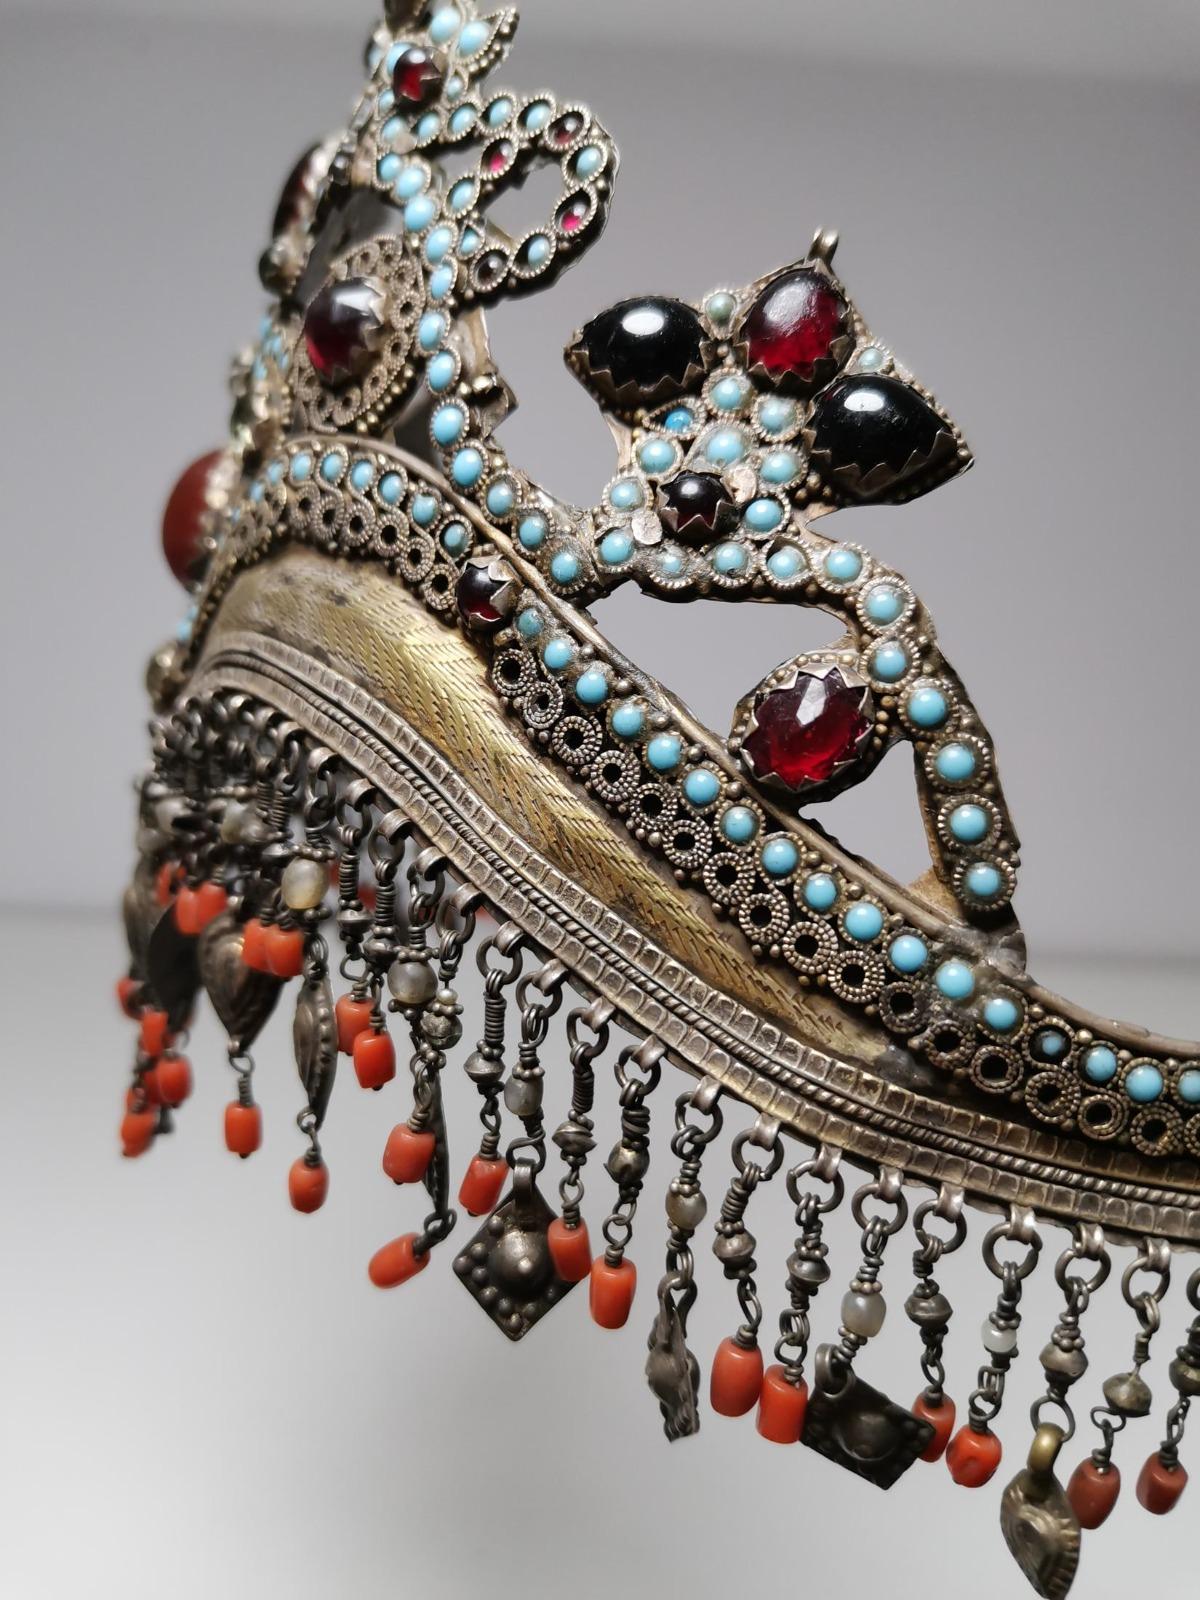 Uzbekistan, Tajikistan: a rare, old ‘bridal crown’ made of silver, gilded in parts, with turquoise coloured ornamental stones, glass, coral, and many pendants.
Uzbek and Tajik women wore these ‘bridal crowns’ for the first time at their weddings